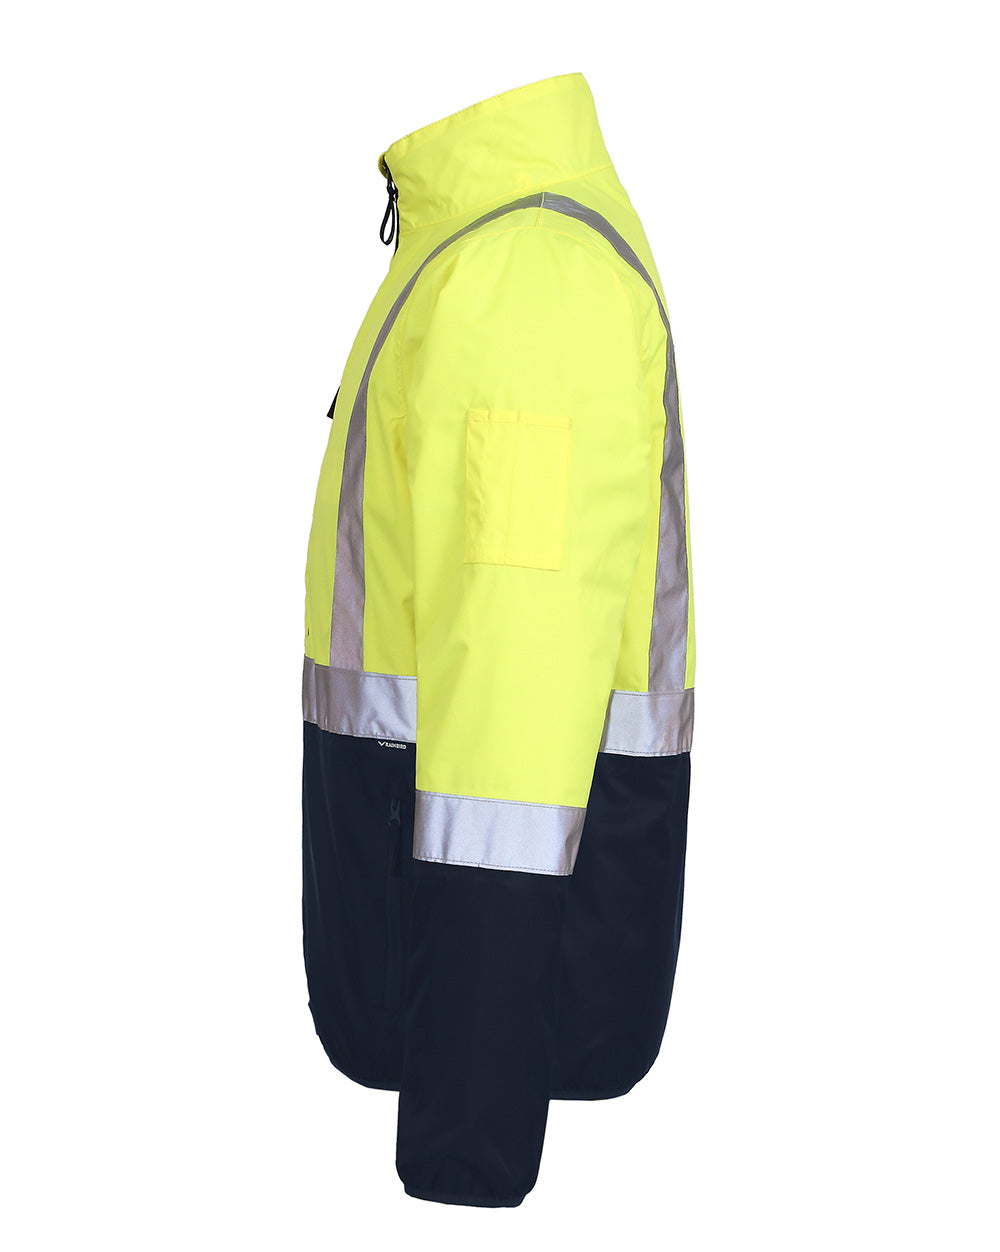 Pilot Jacket with Tape in Fluoro Yellow & Navy